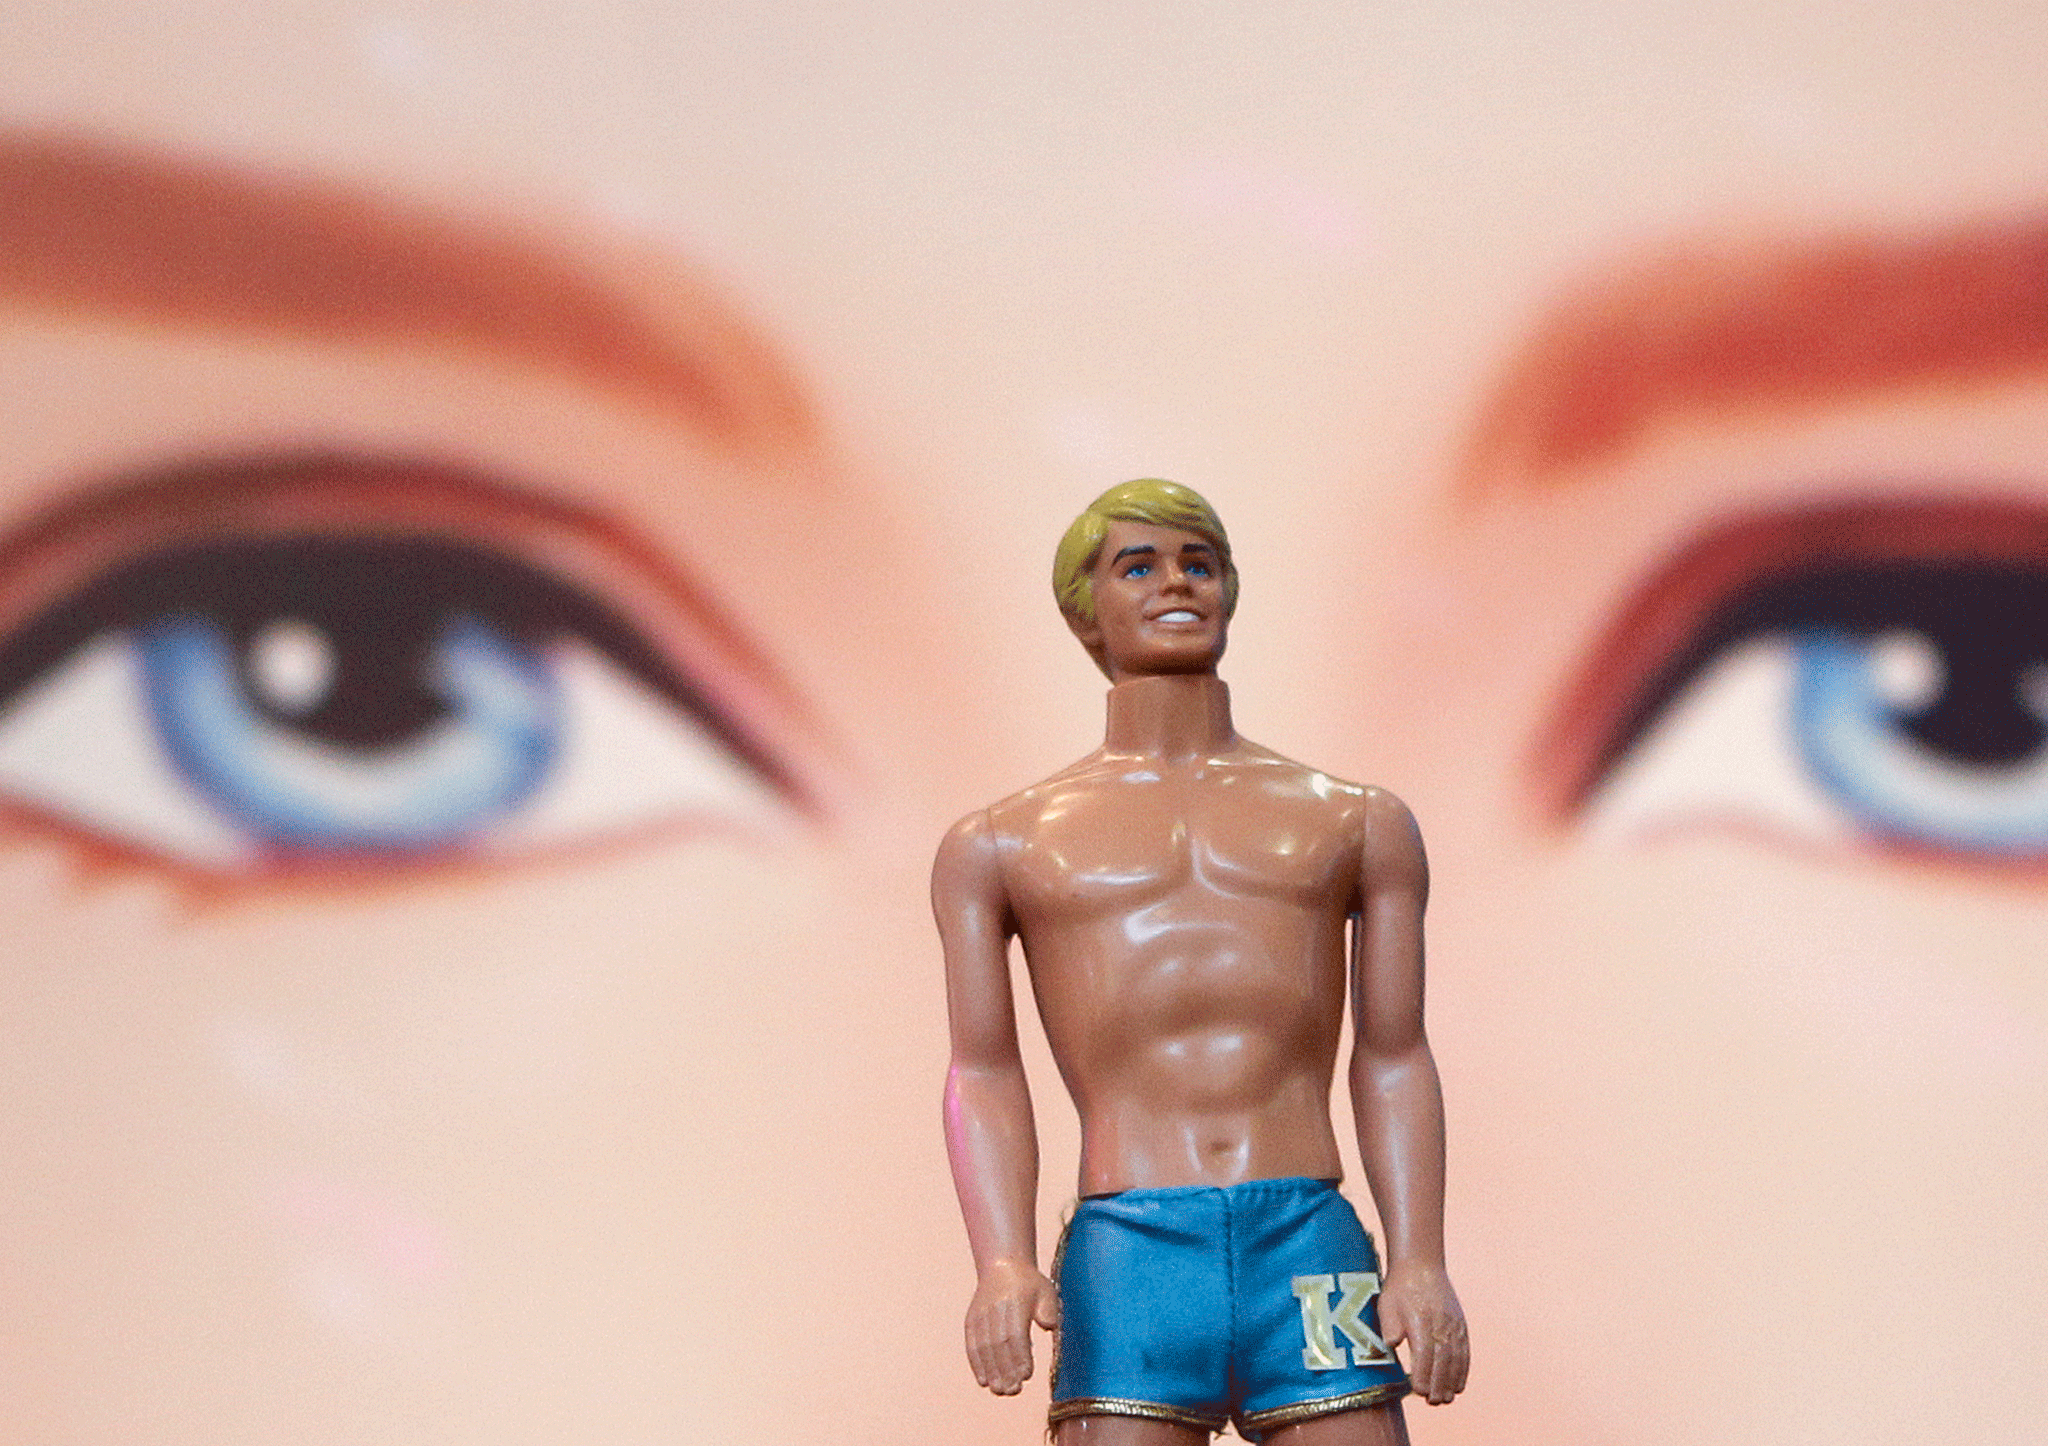 Ken Doll Gets A Diverse Makeover And Is Now Available In Seven Different Skin Tones The